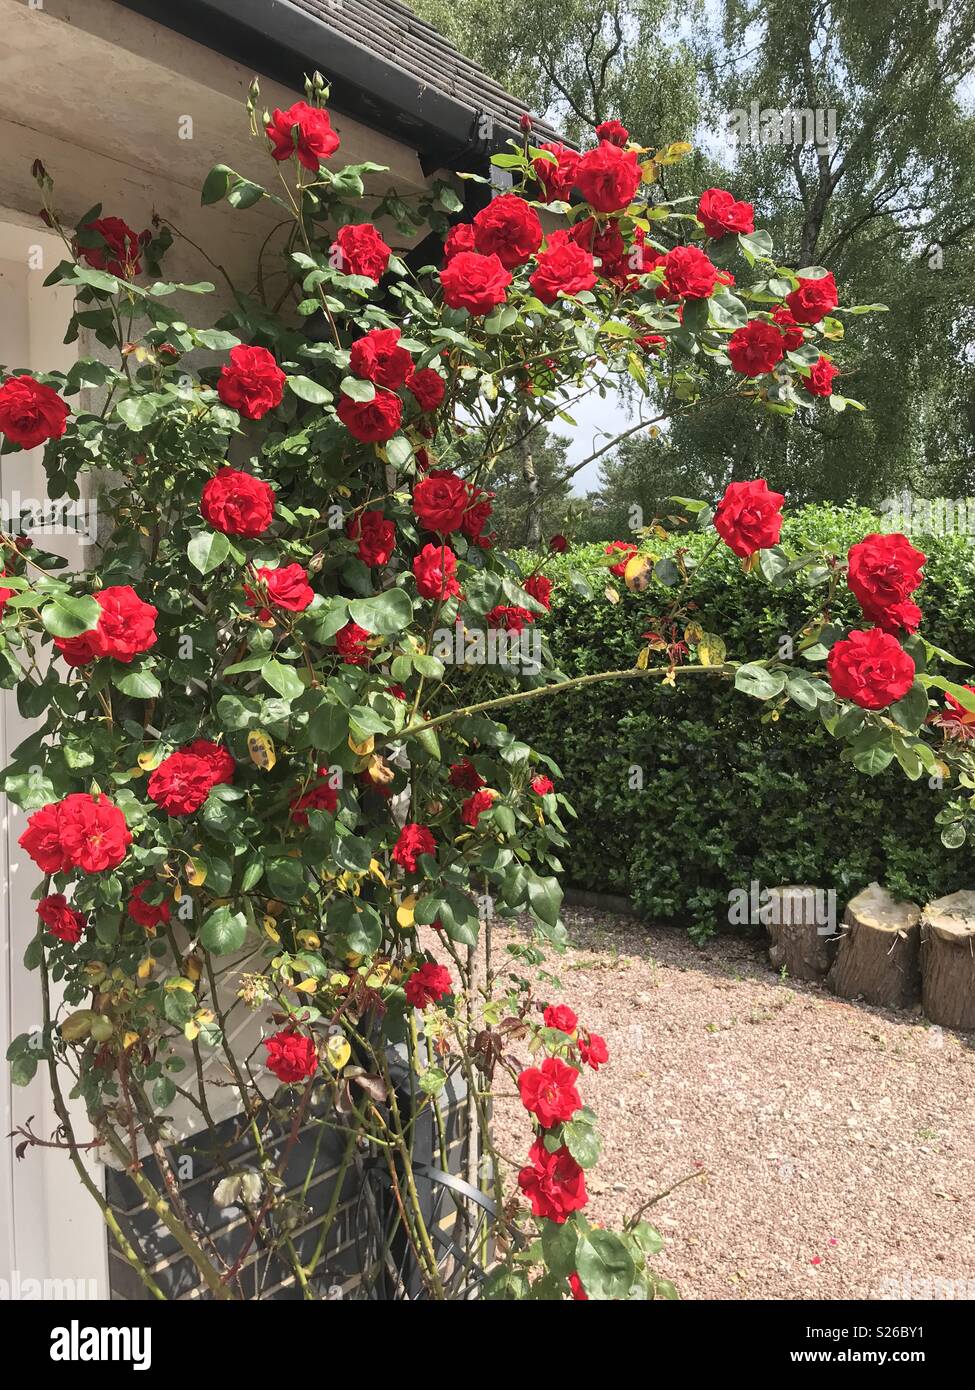 Red roses climbing up the side of a house Stock Photo - Alamy